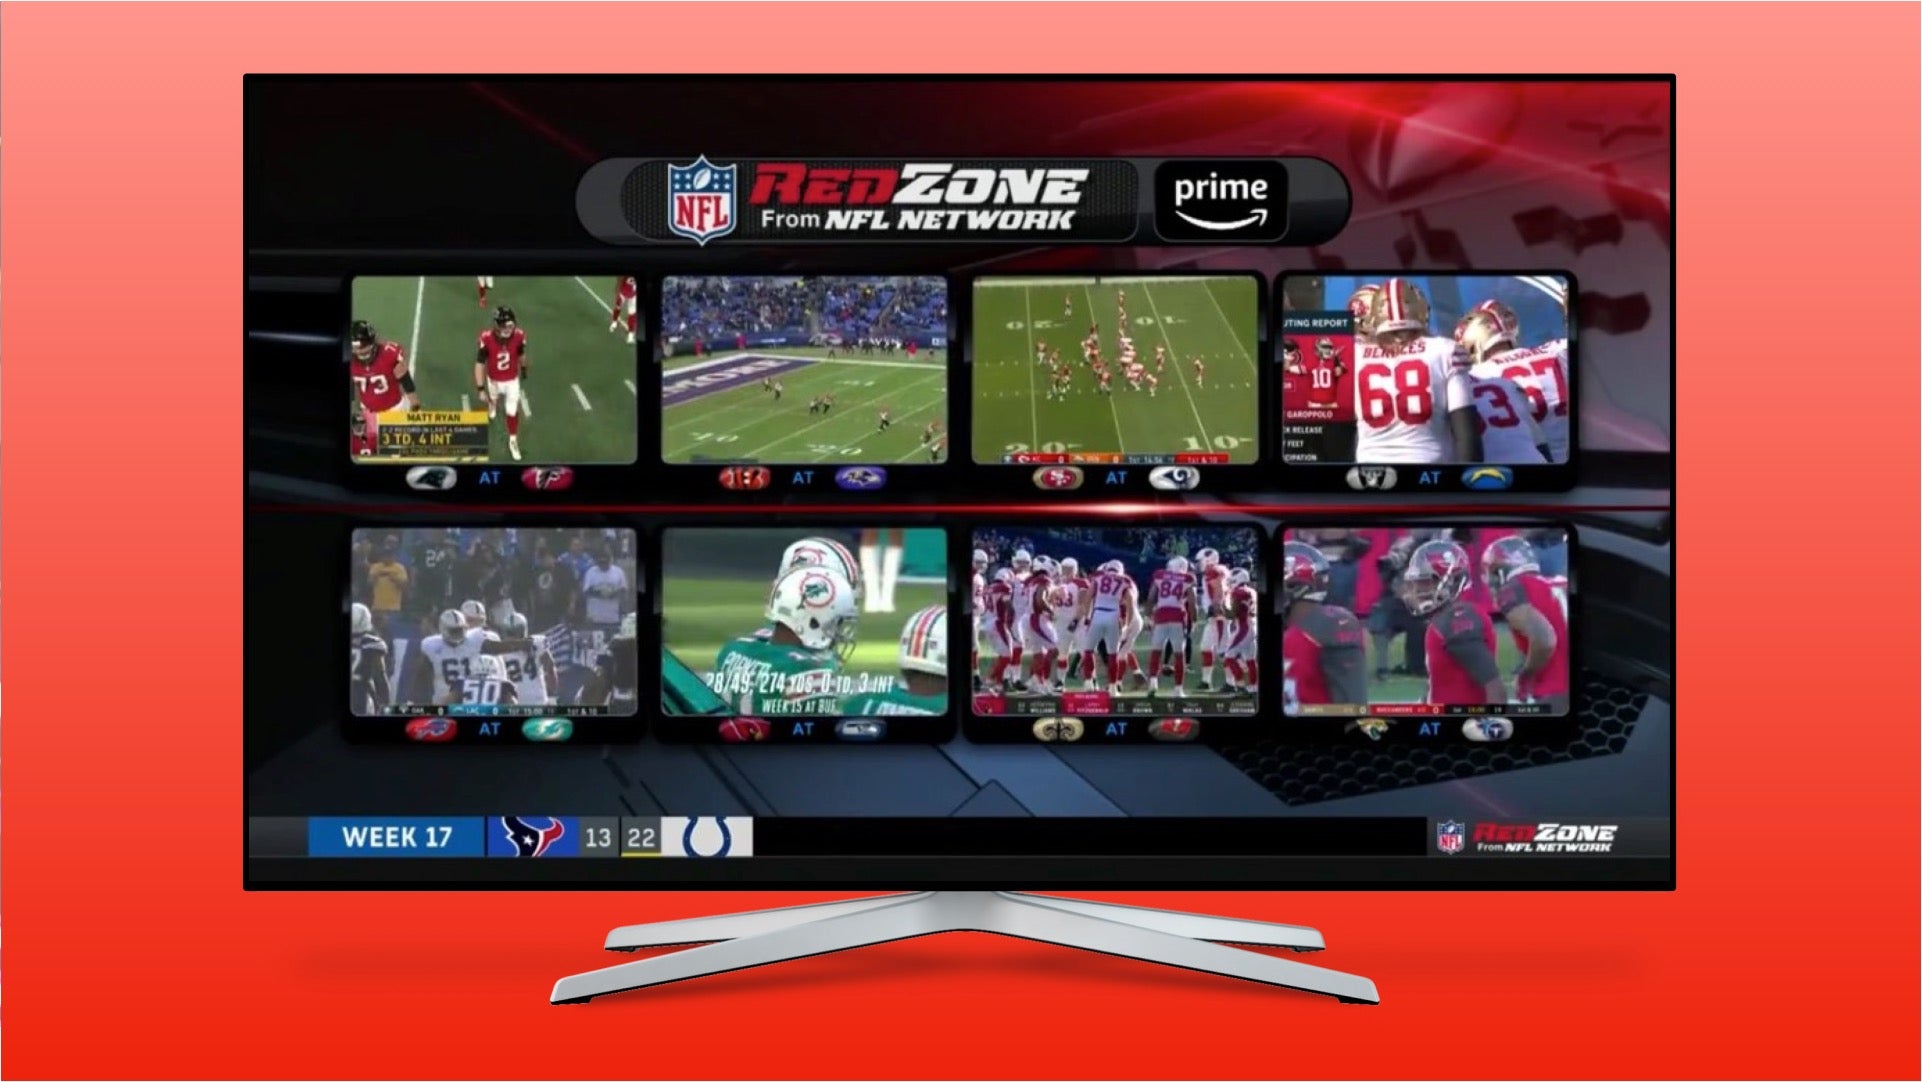 Can You Get Nfl Redzone On Hulu How To Stream Live Nfl Games Nfl Redzone During The 2020 Season Even Without Cable Satellite The Streamable